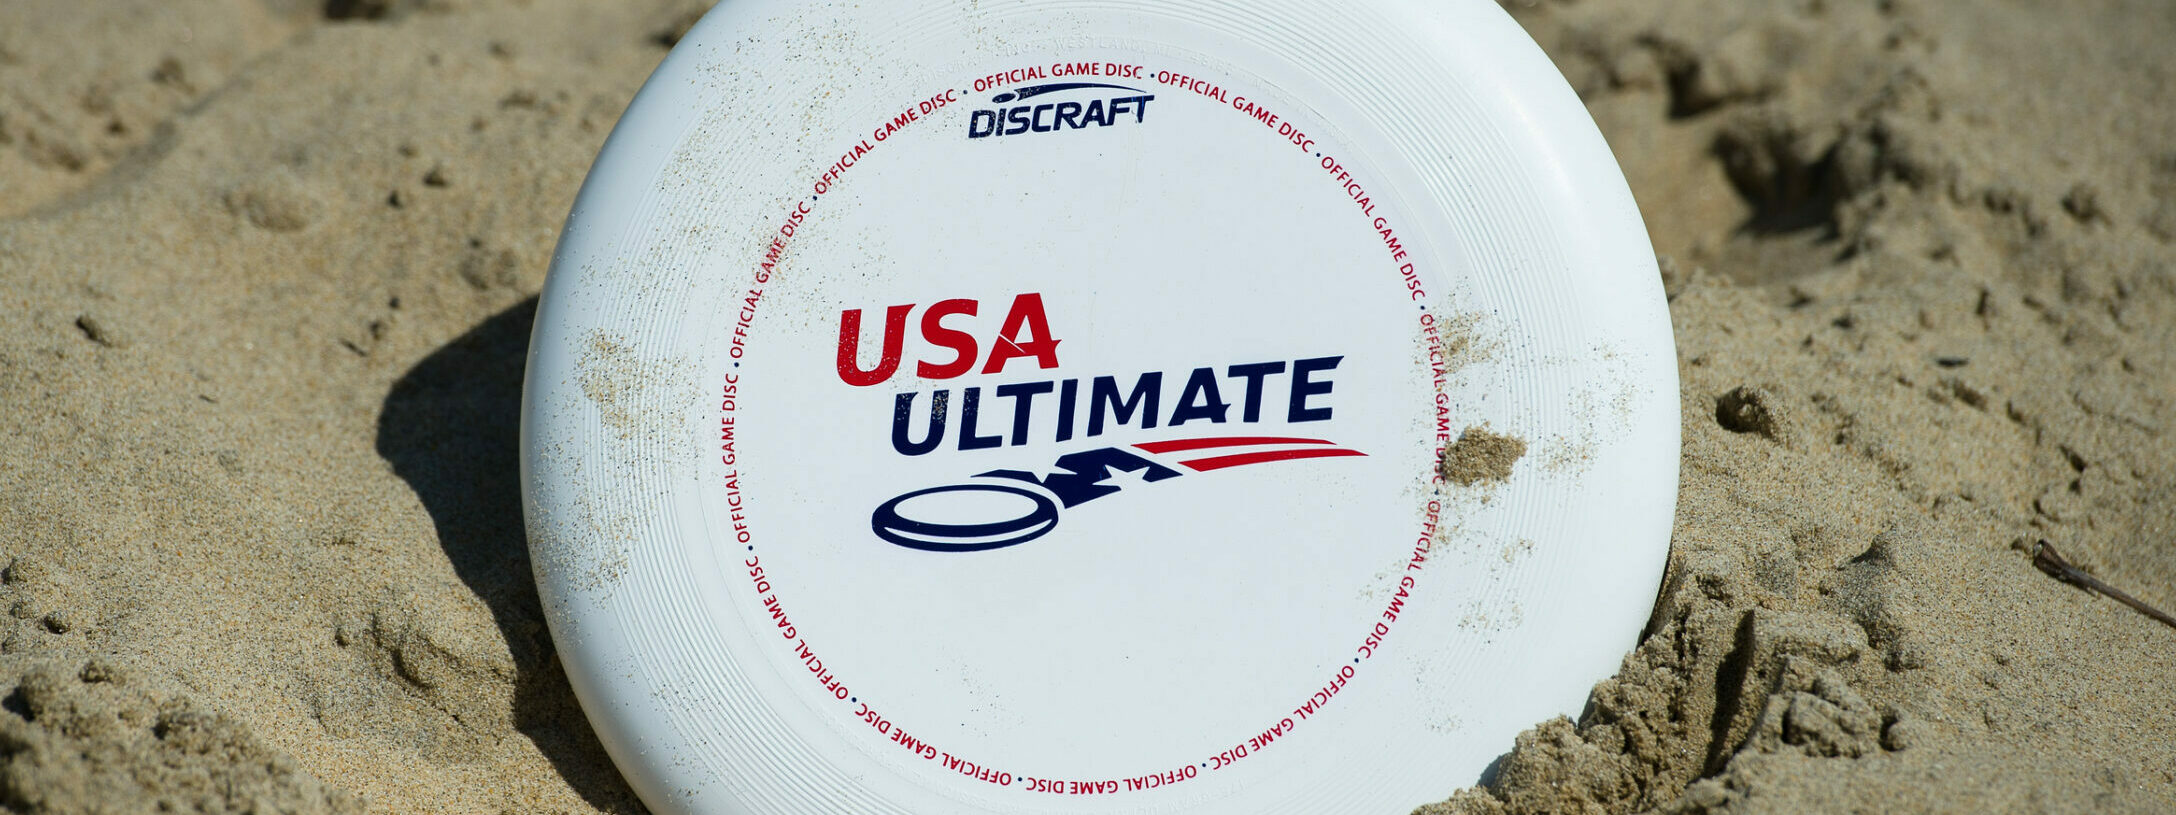 About Usa Ultimate